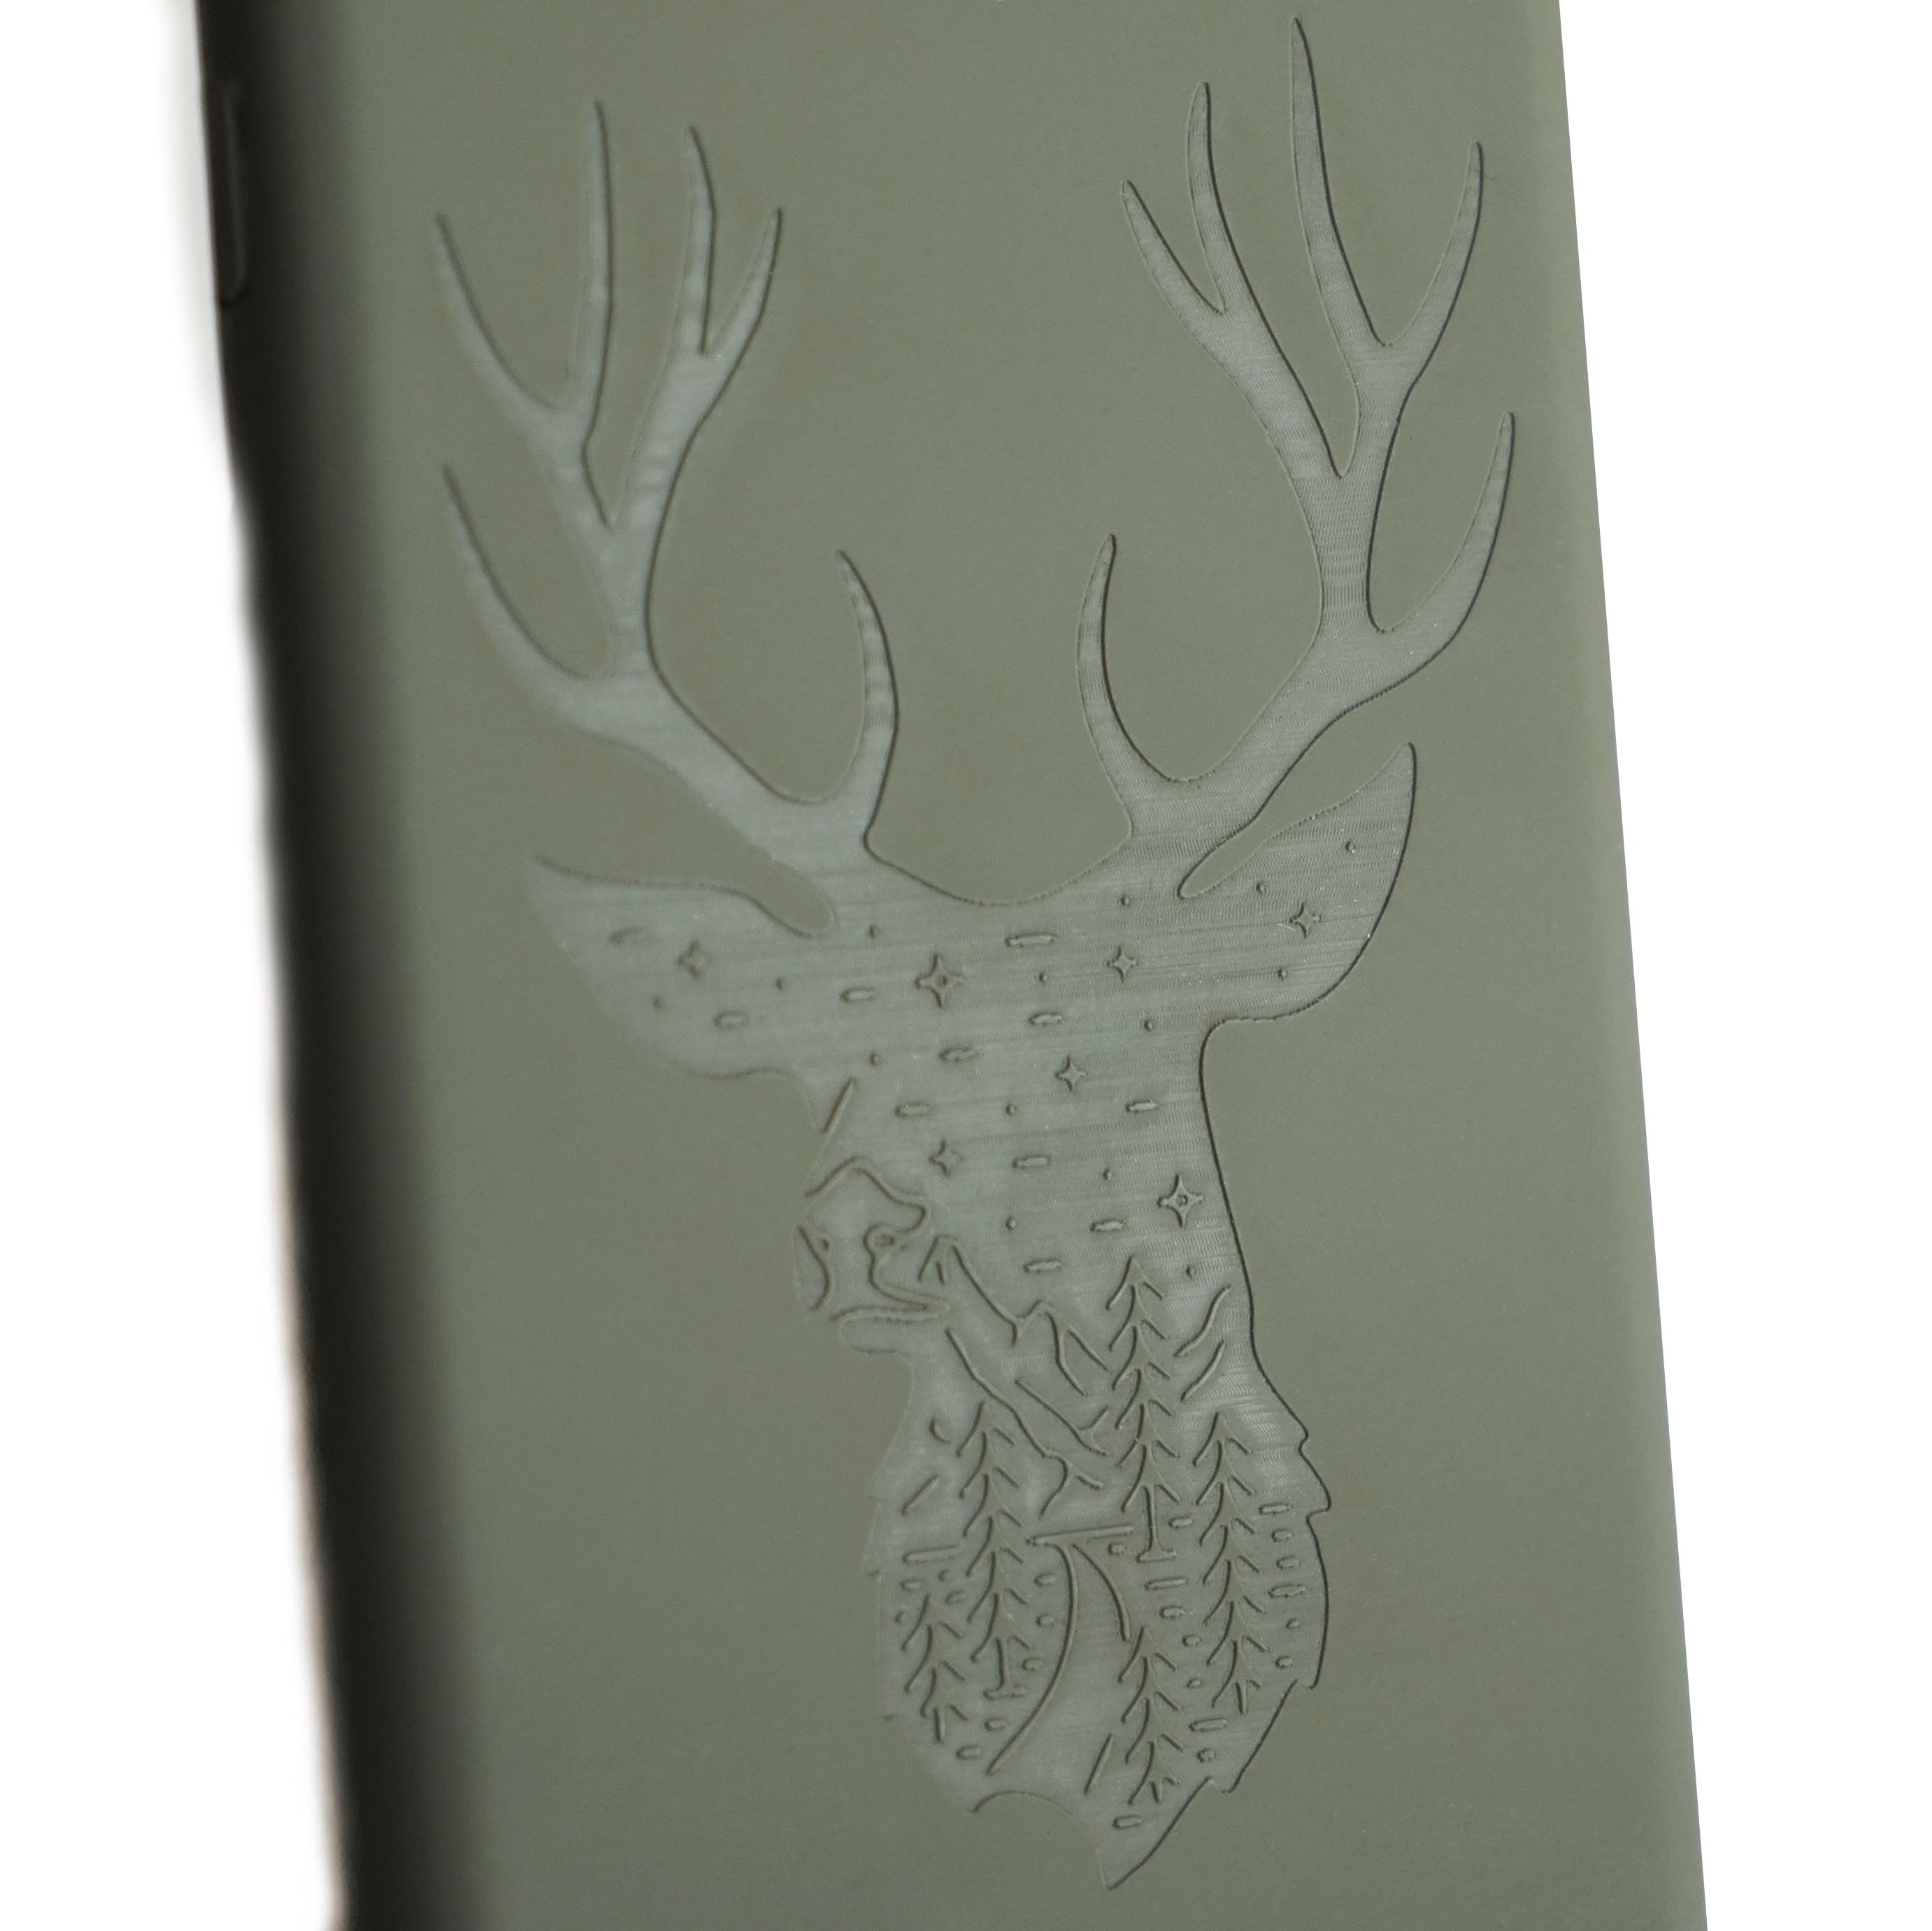 Night Stag Silicone - iPhone / Samsung